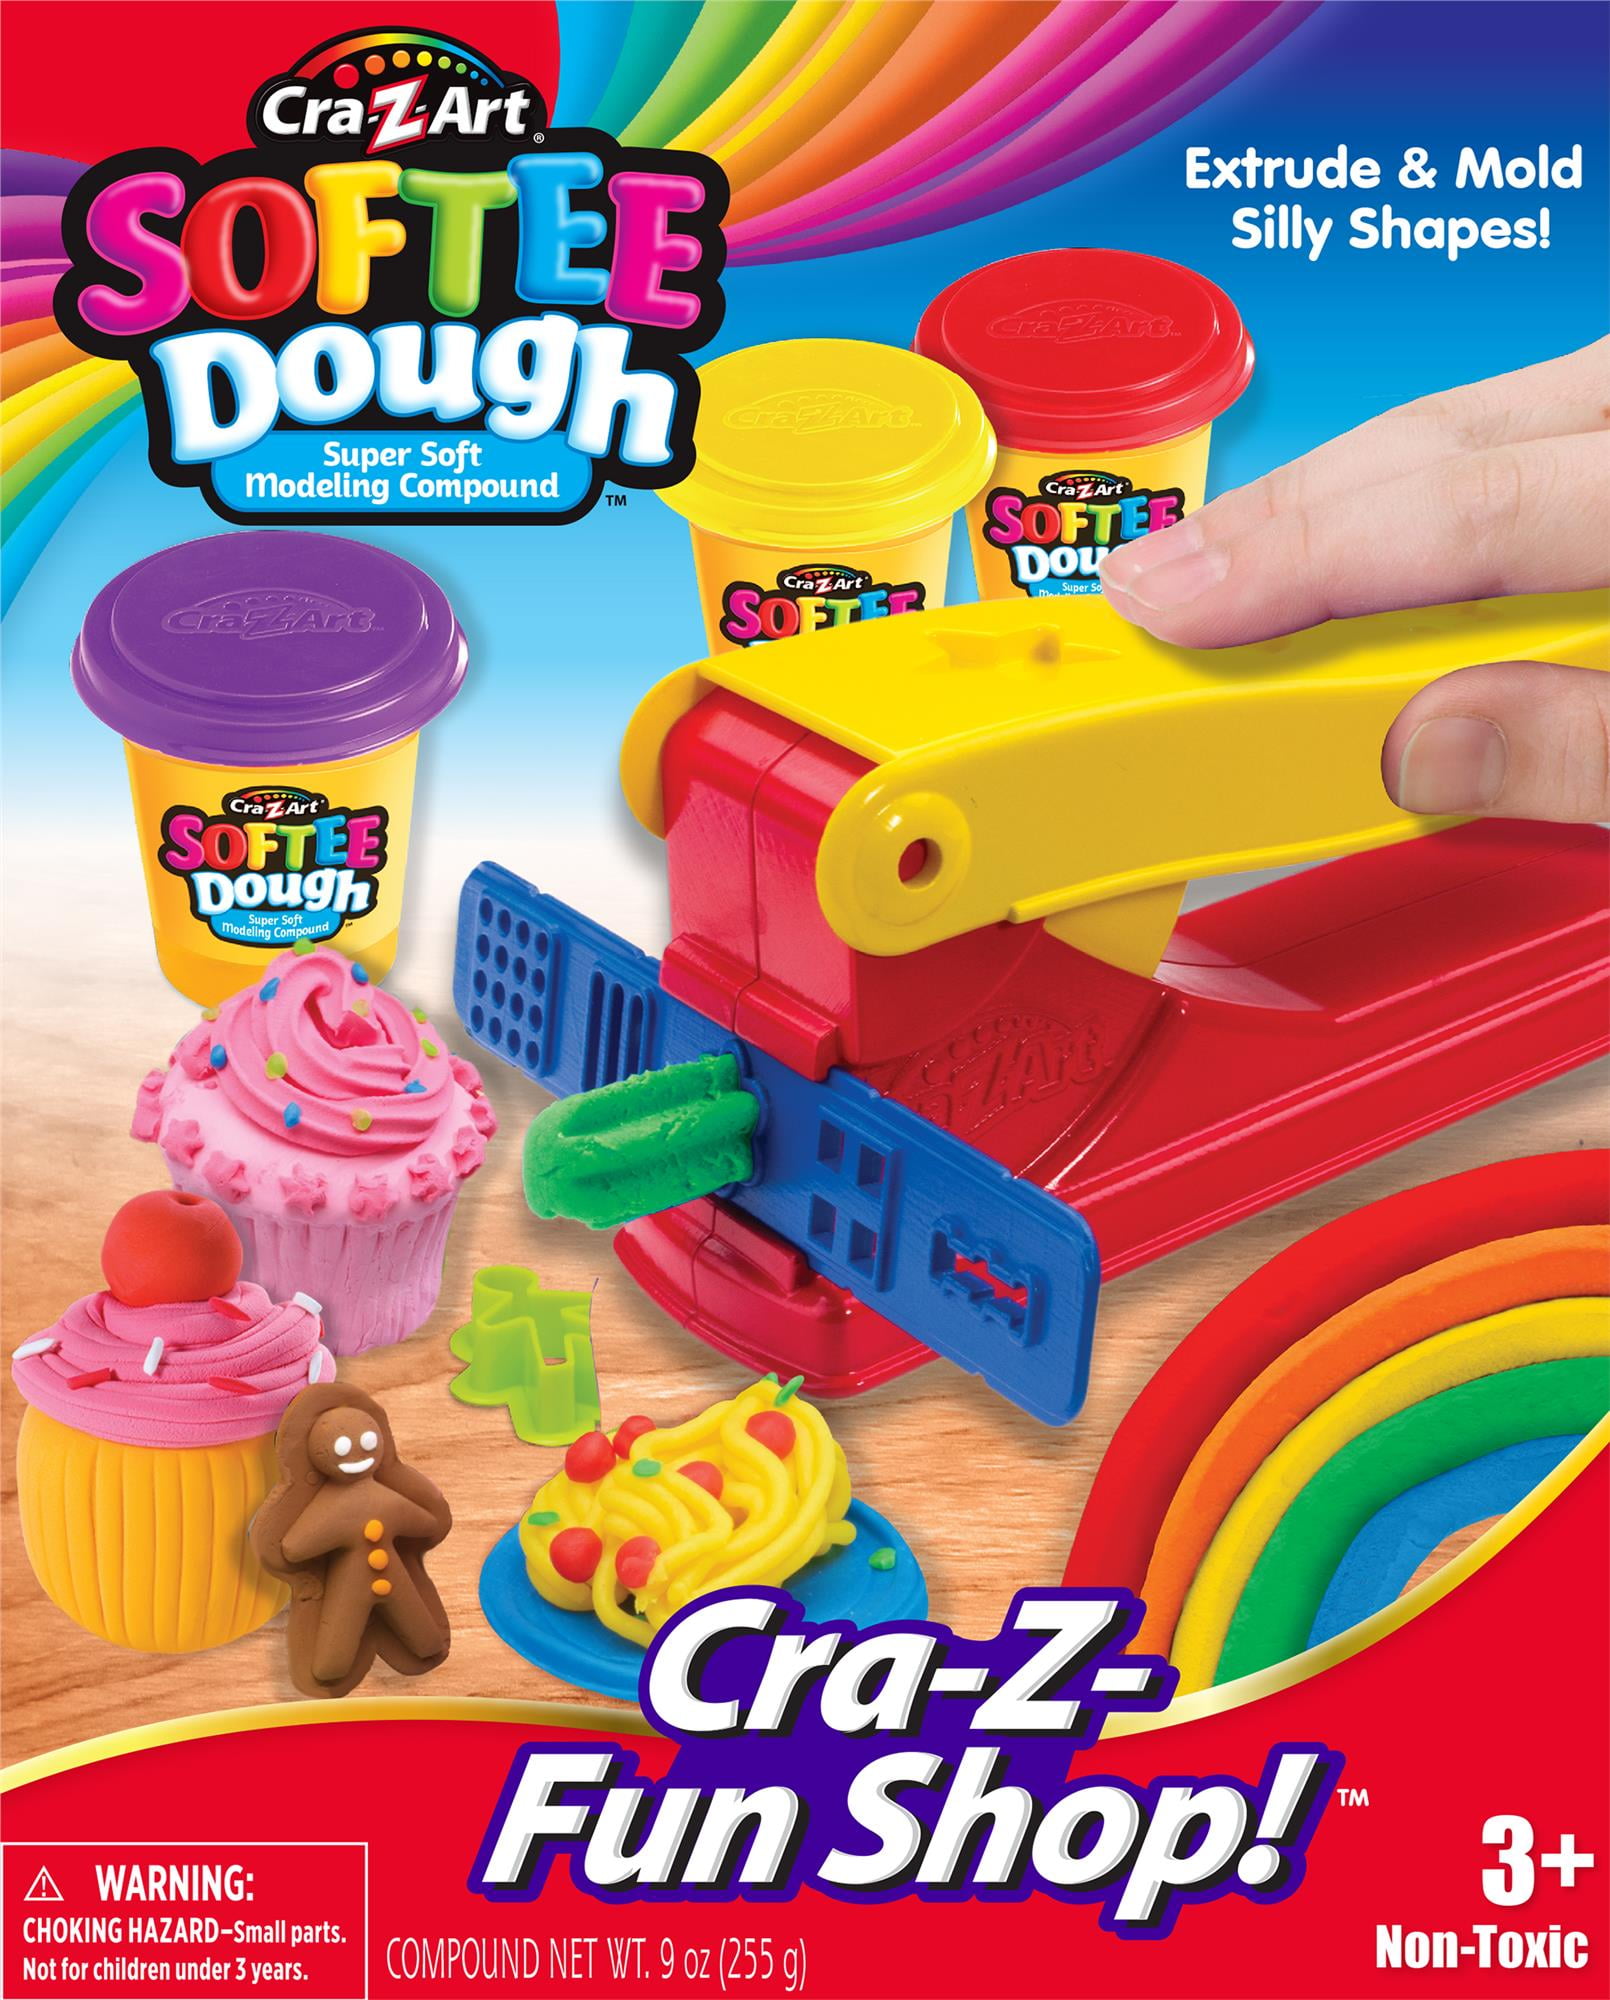 4 Pack Glitter & 4 Pack Scented Non-Toxic DB NEW Details about   Cra-Z-Art SOFTEE Dough 